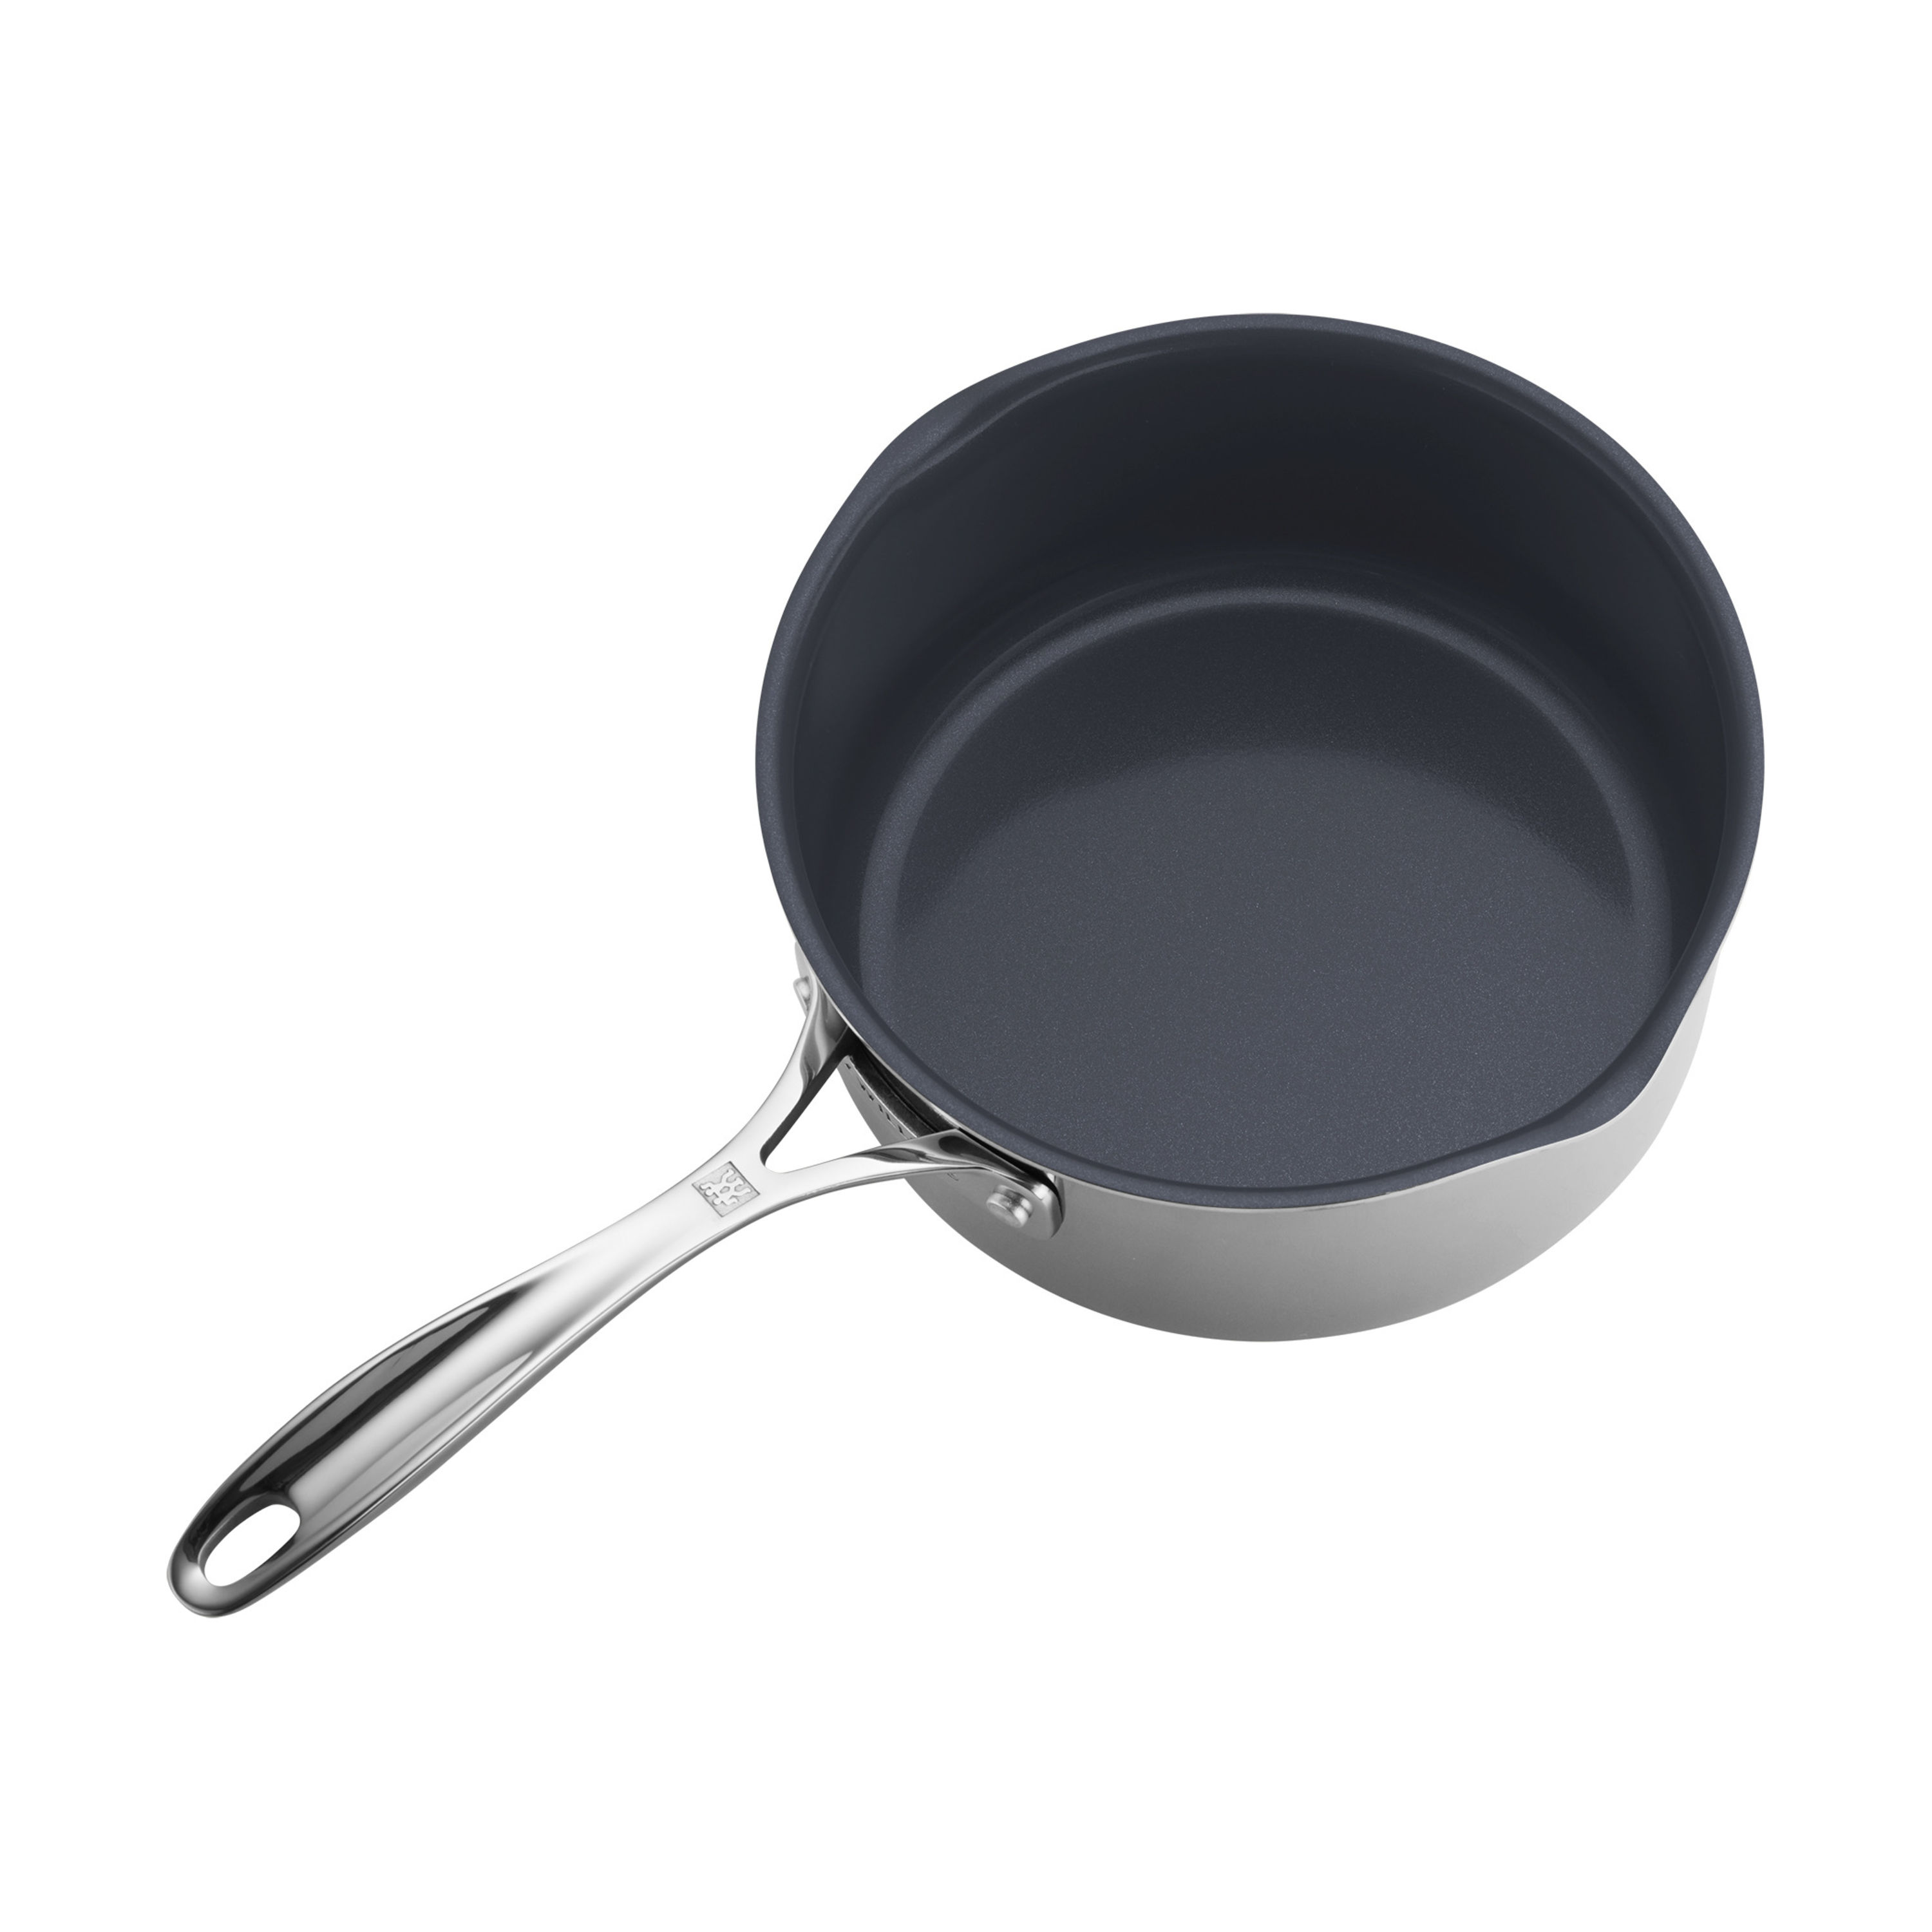 HENCKELS CLAD CFX STAINLESS STEEL CERAMIC NONSTICK FRY PAN - The Peppermill